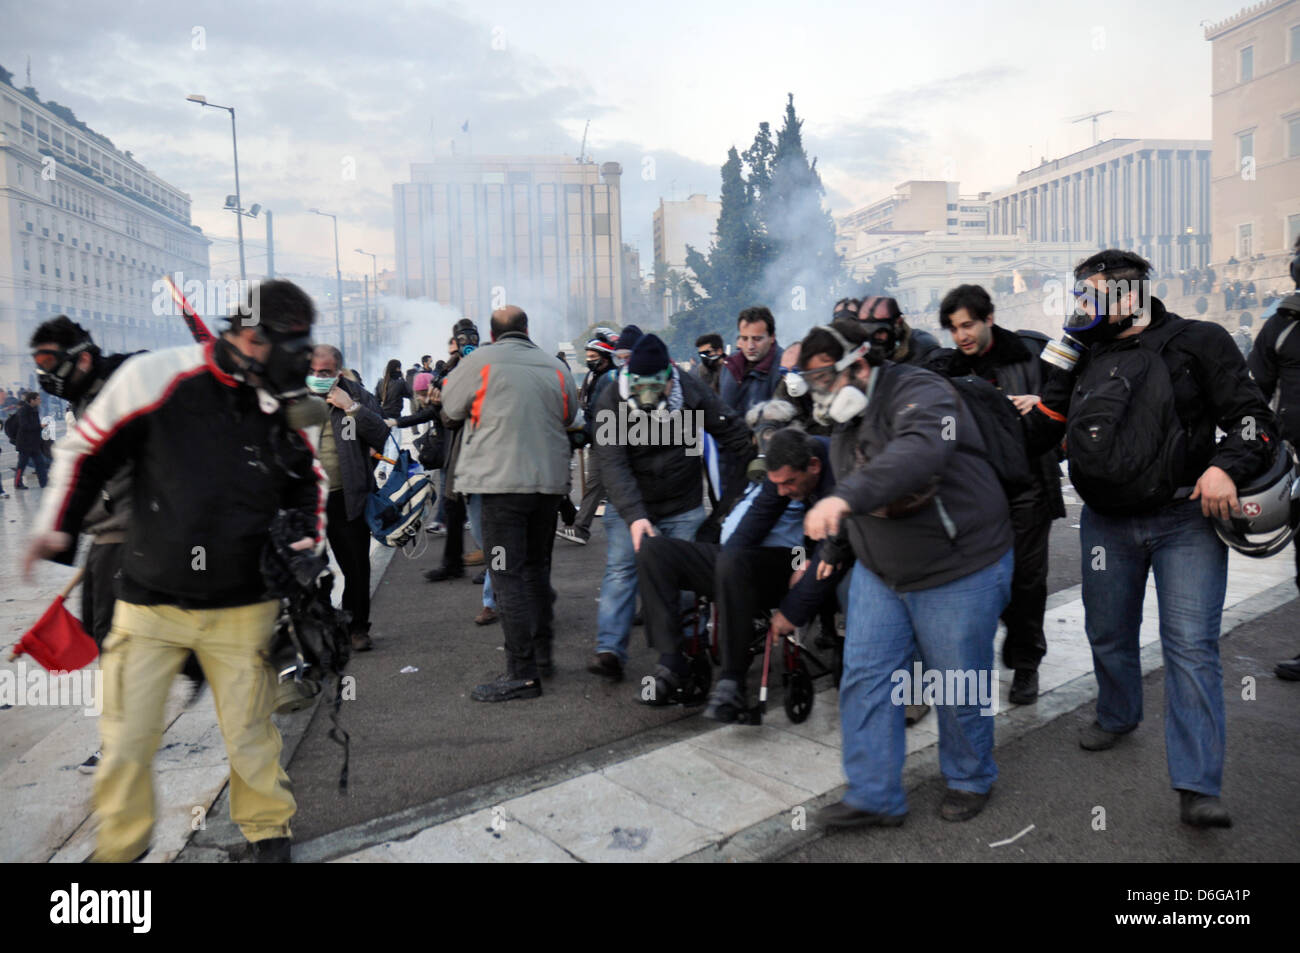 Musician Mikis Mikis Theodorakis (C-86), who is wearing a gas mask in the picture, collapses during a demonstration and is seated in a wheelchair by companions in Athens, Greece, 12 February 2012. Mikis Theodorakishas had to cancel his attendance at a demonstration against an austerity programme of the Greek government, due to breathing troubles. Photo: Wassilis Aswestopoulos Stock Photo